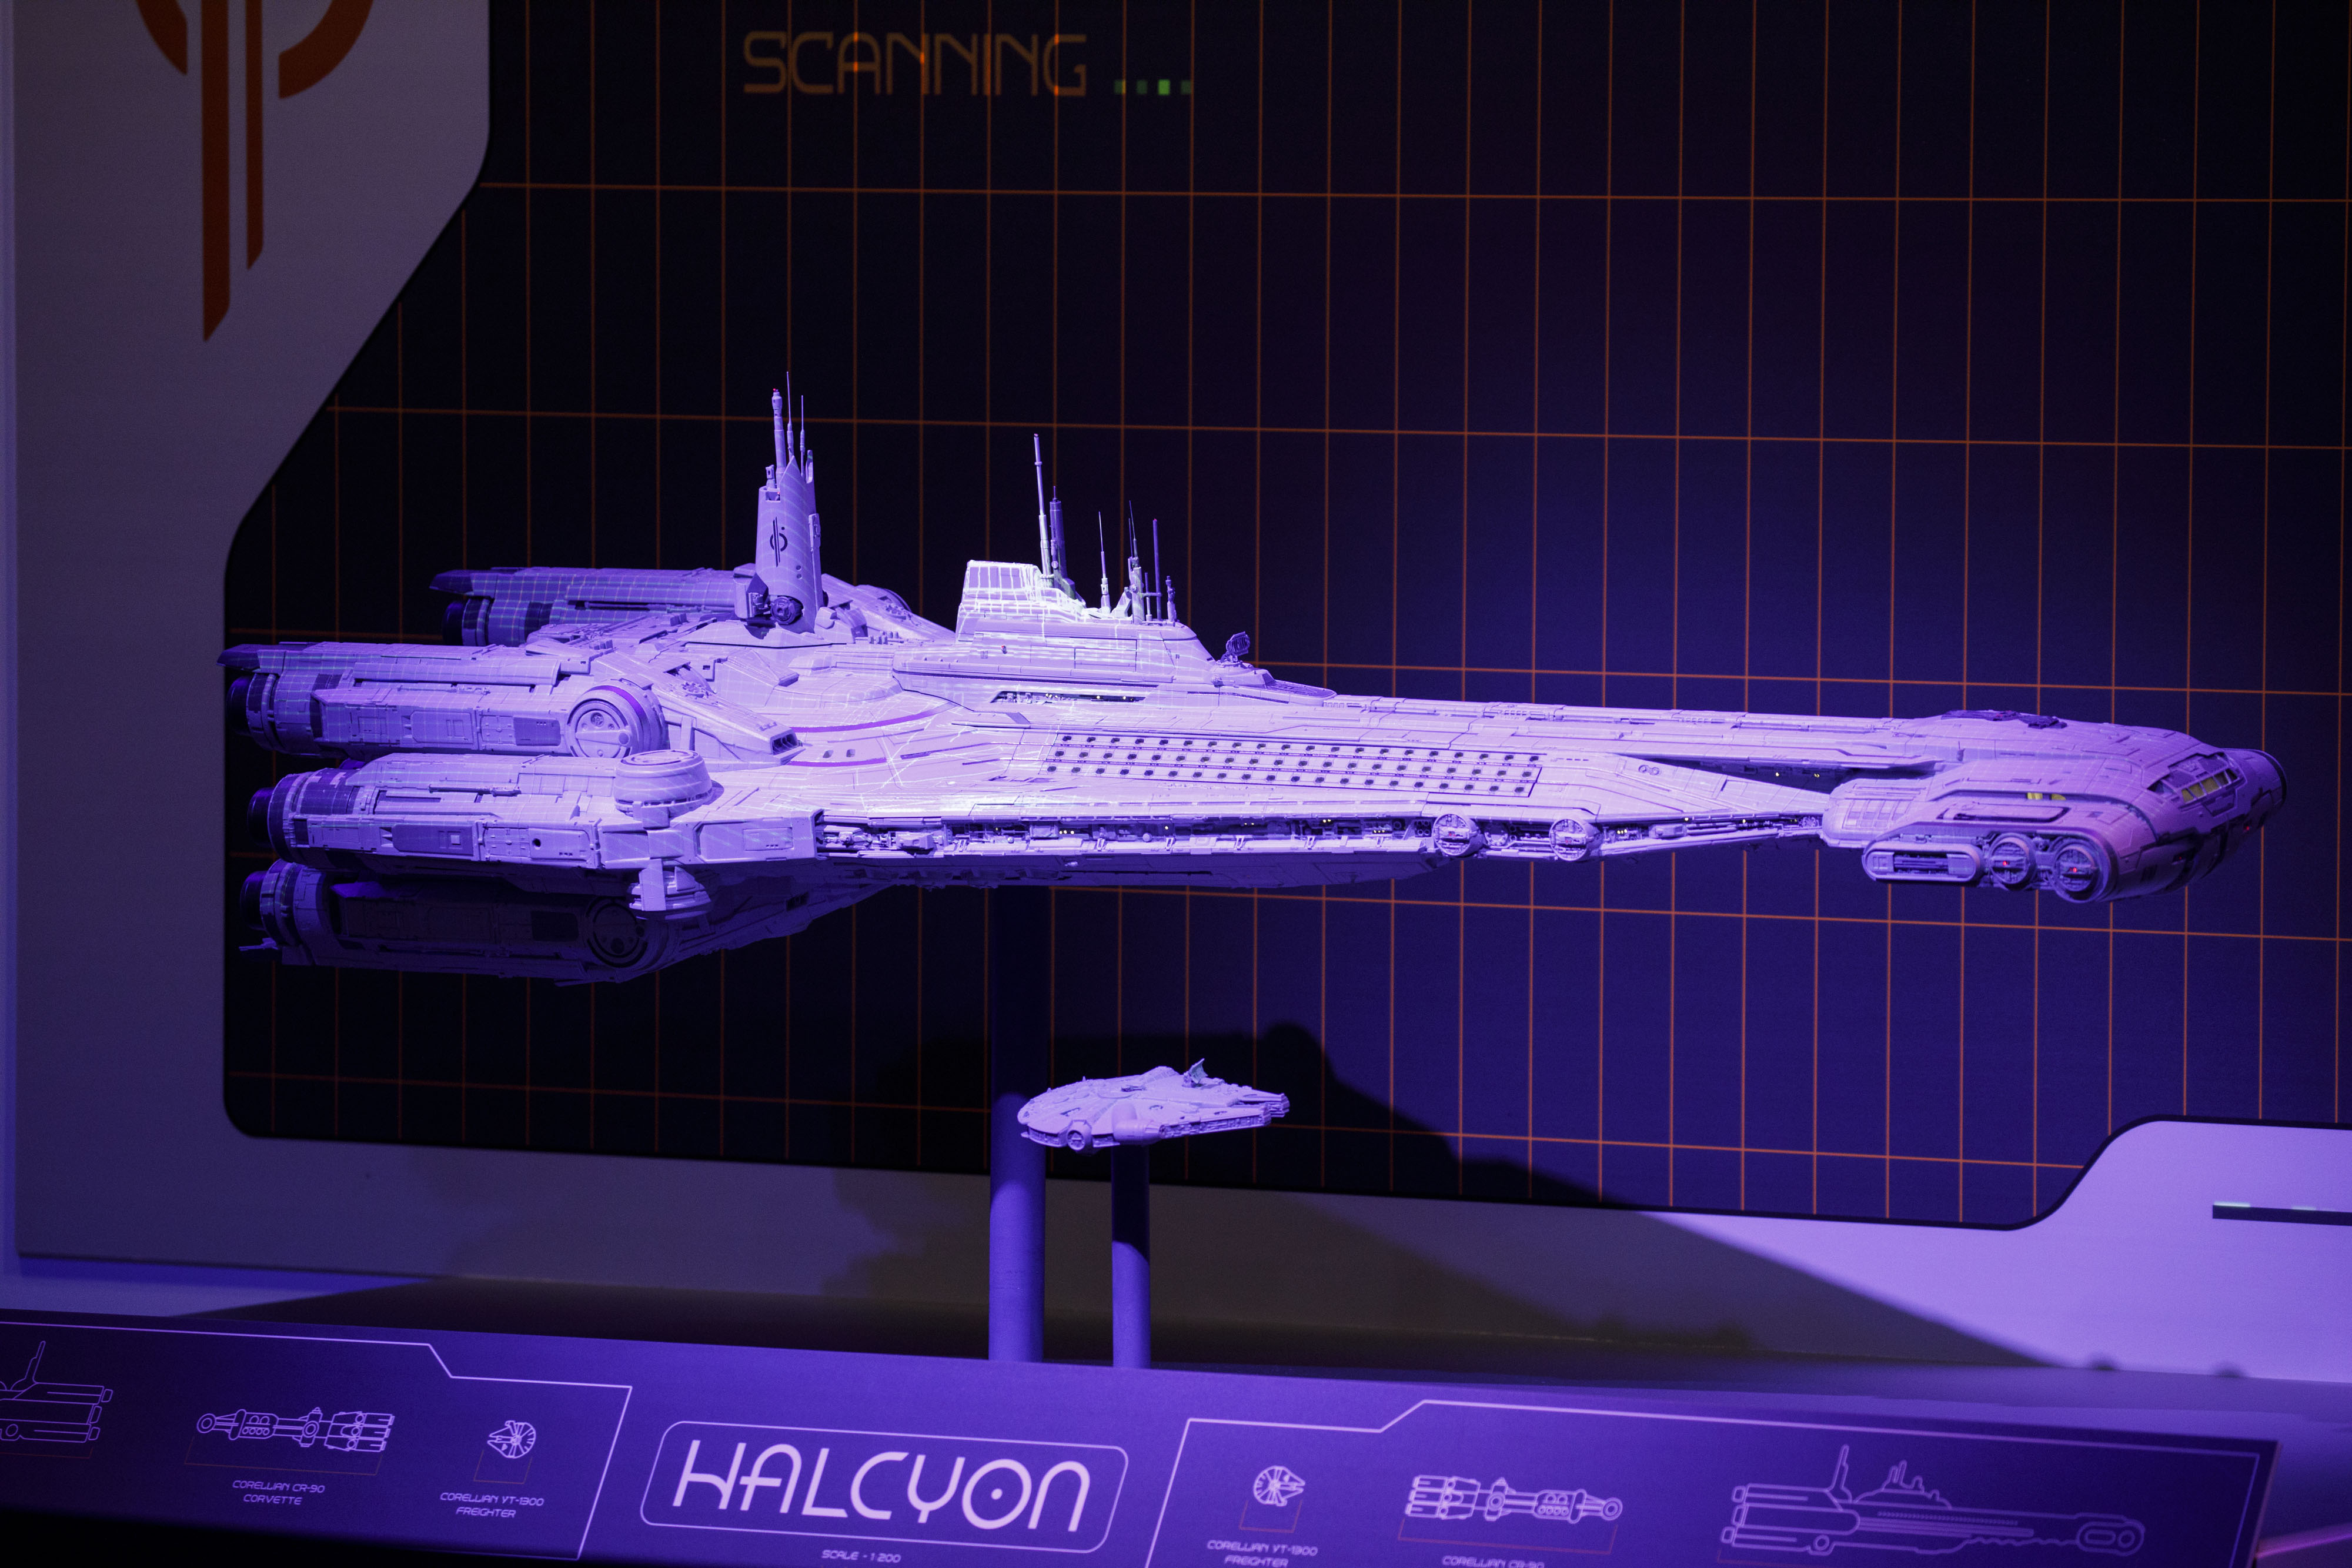 A model of the Millennium Falcon stands beneath a model of the Halcyon ship.